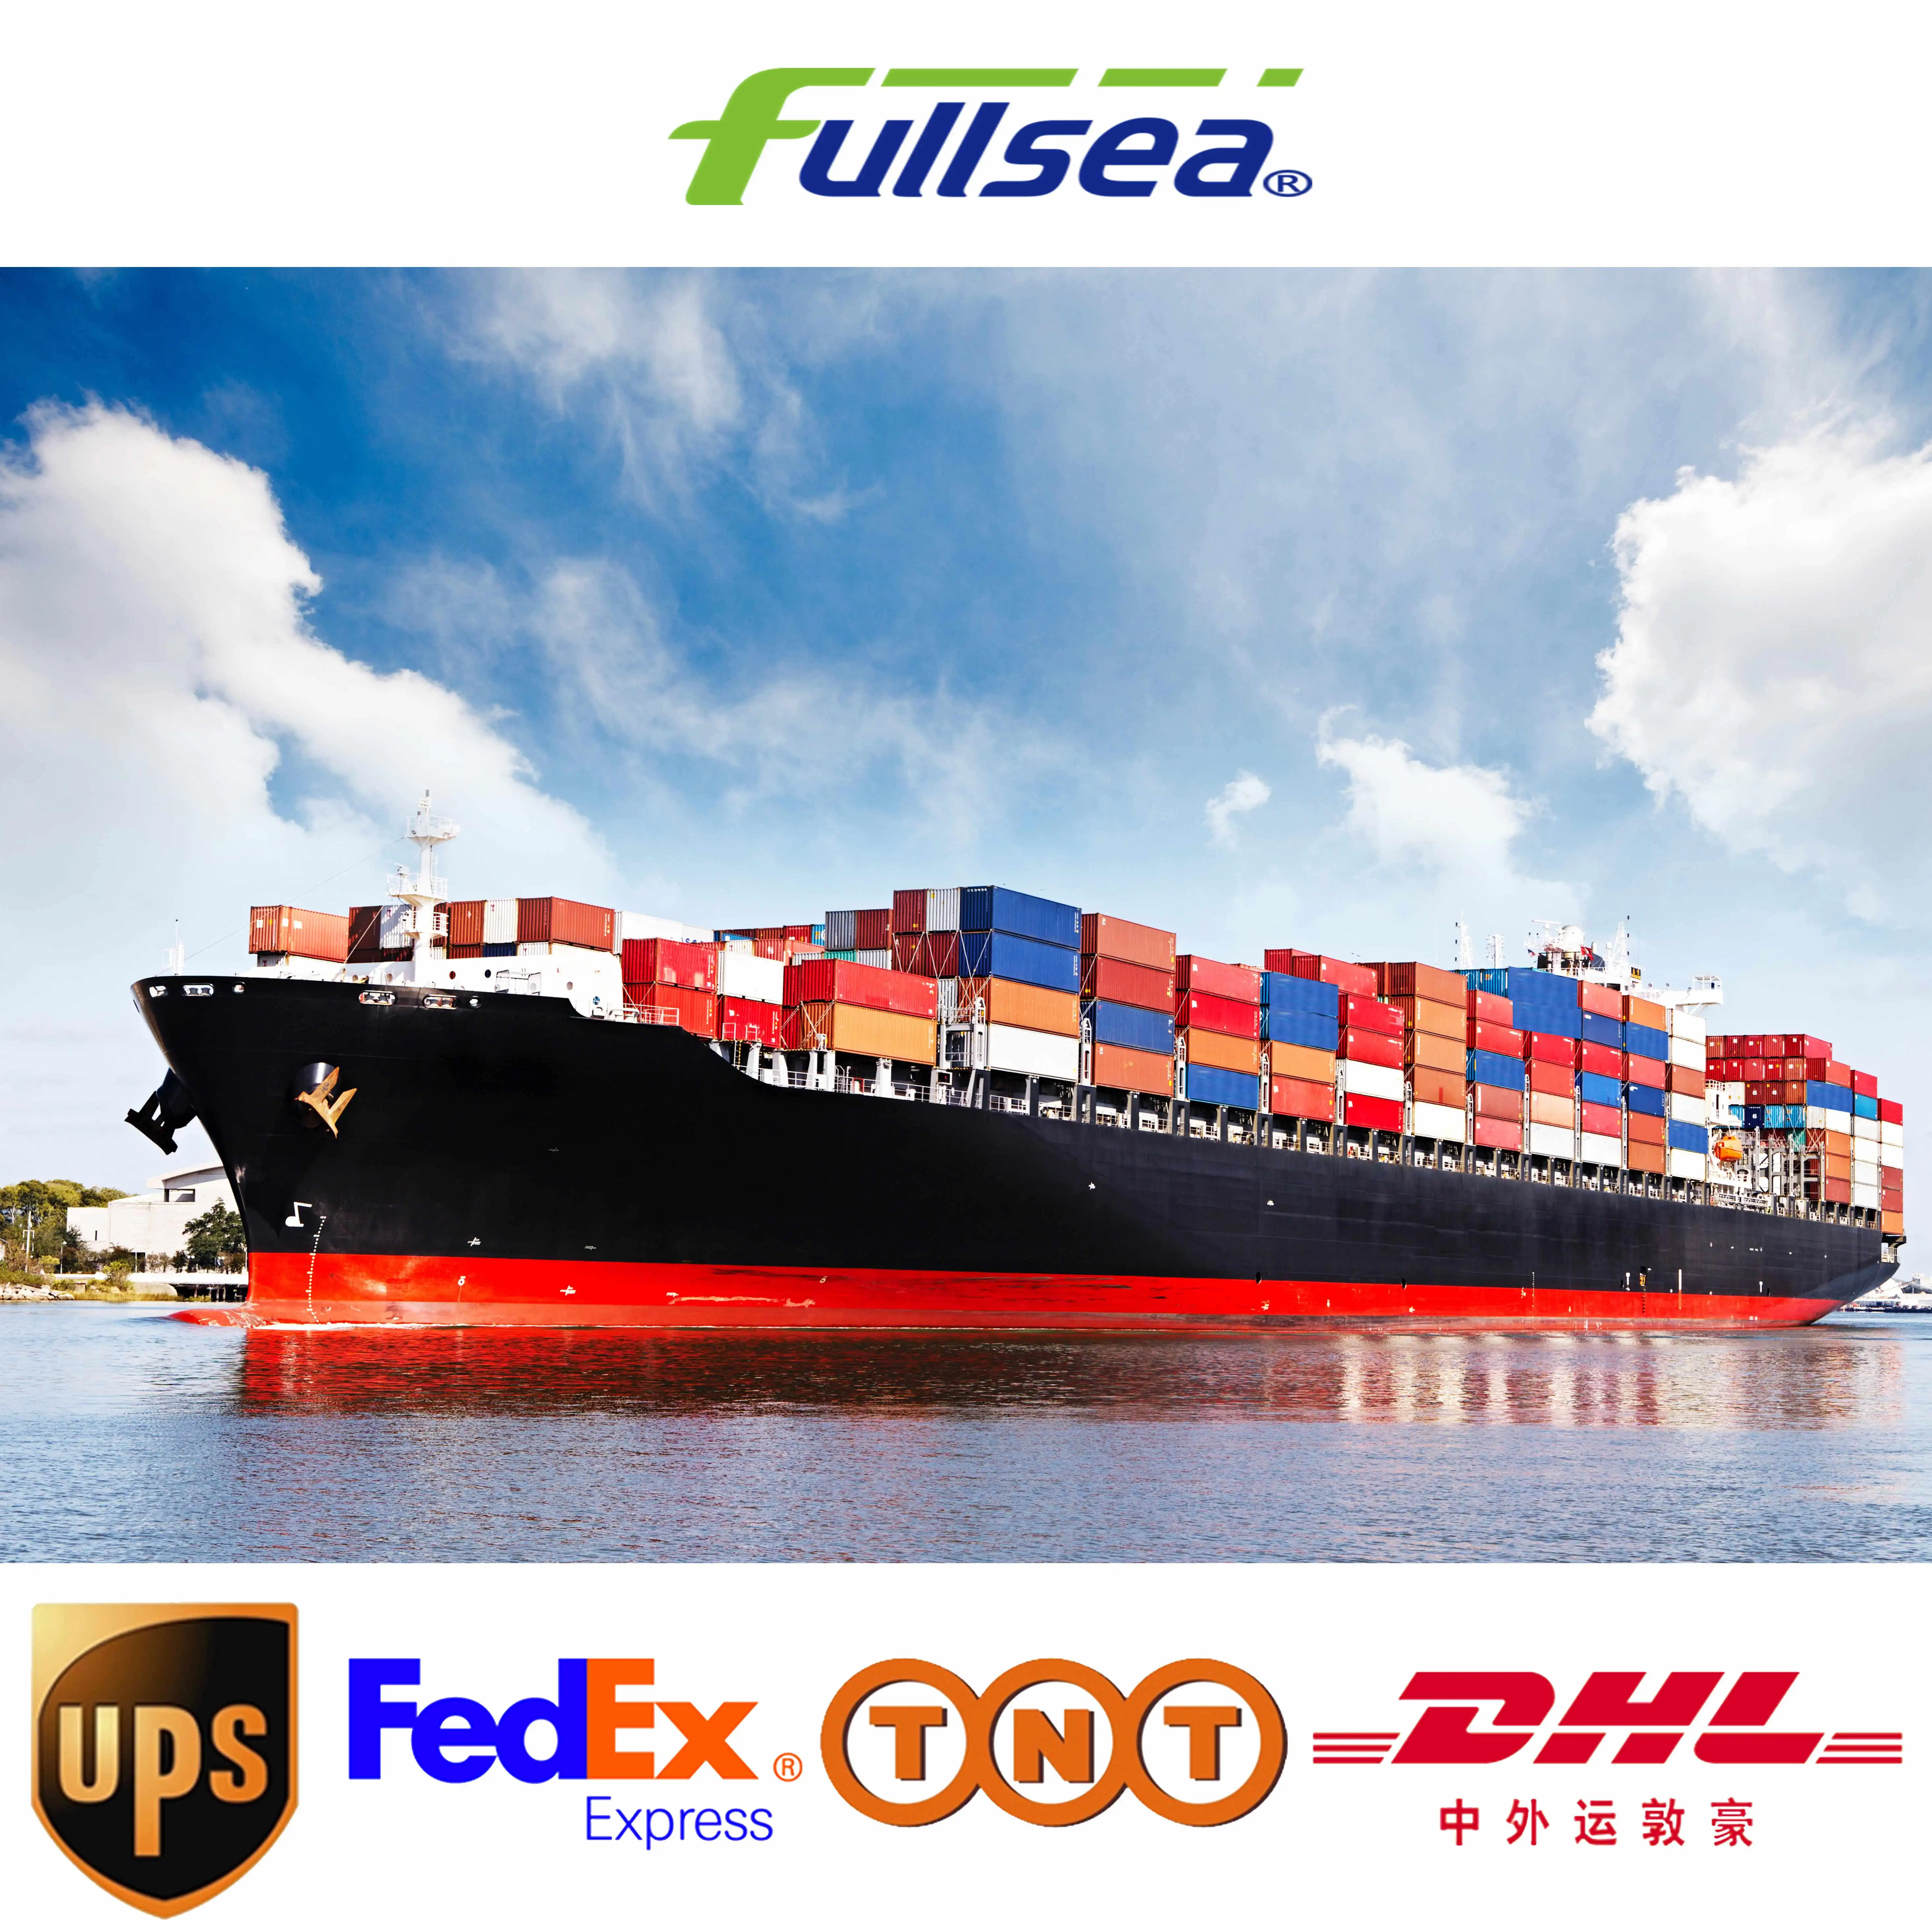 Fuhai supply chain from China to Europe and America safe and fast international logistics